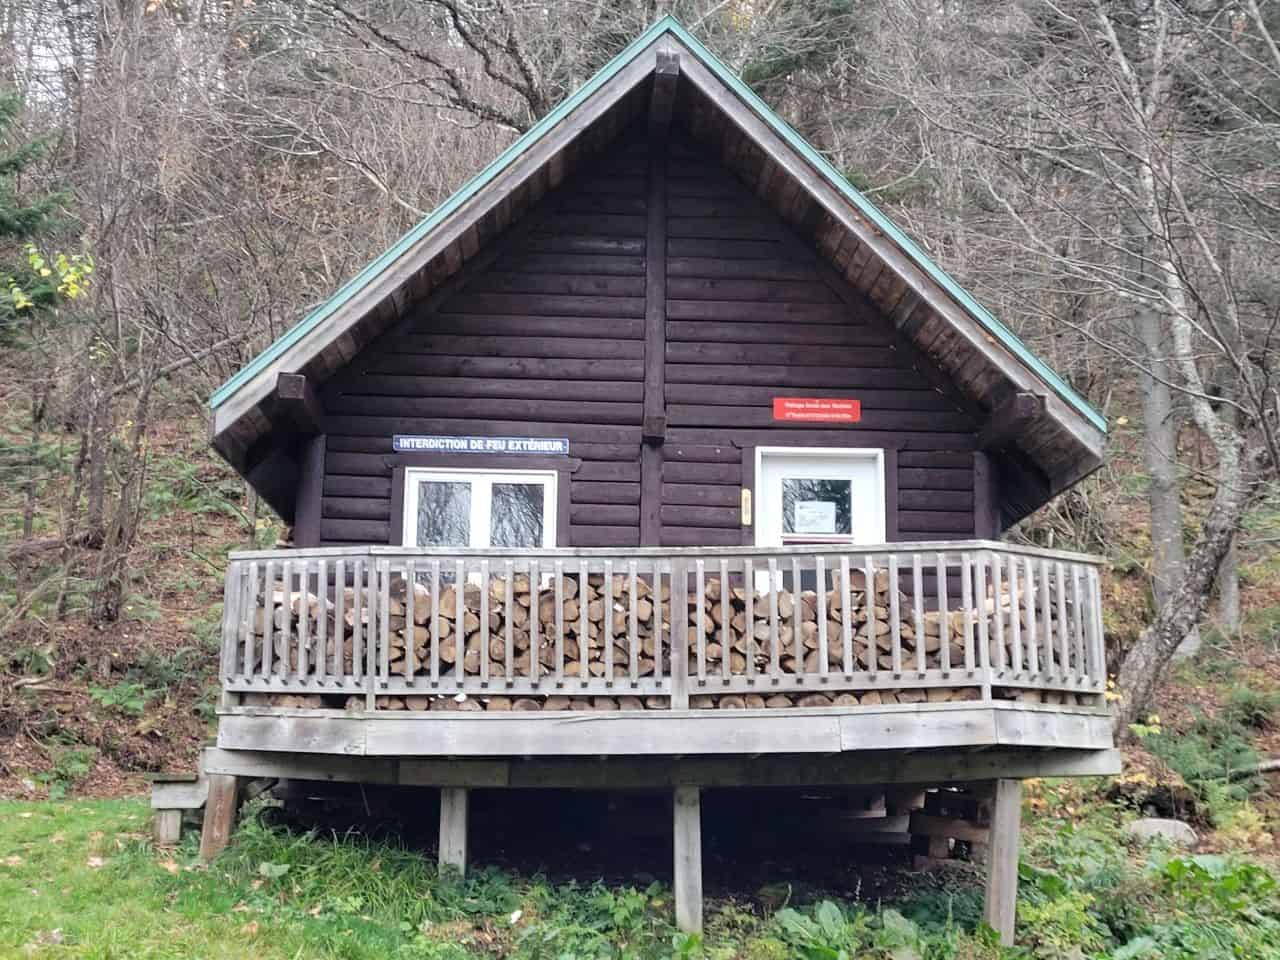 Rustic cabins and campsites on the Sentier des Caps hiking trail provide perfect accommodations for hikers and snowshoers